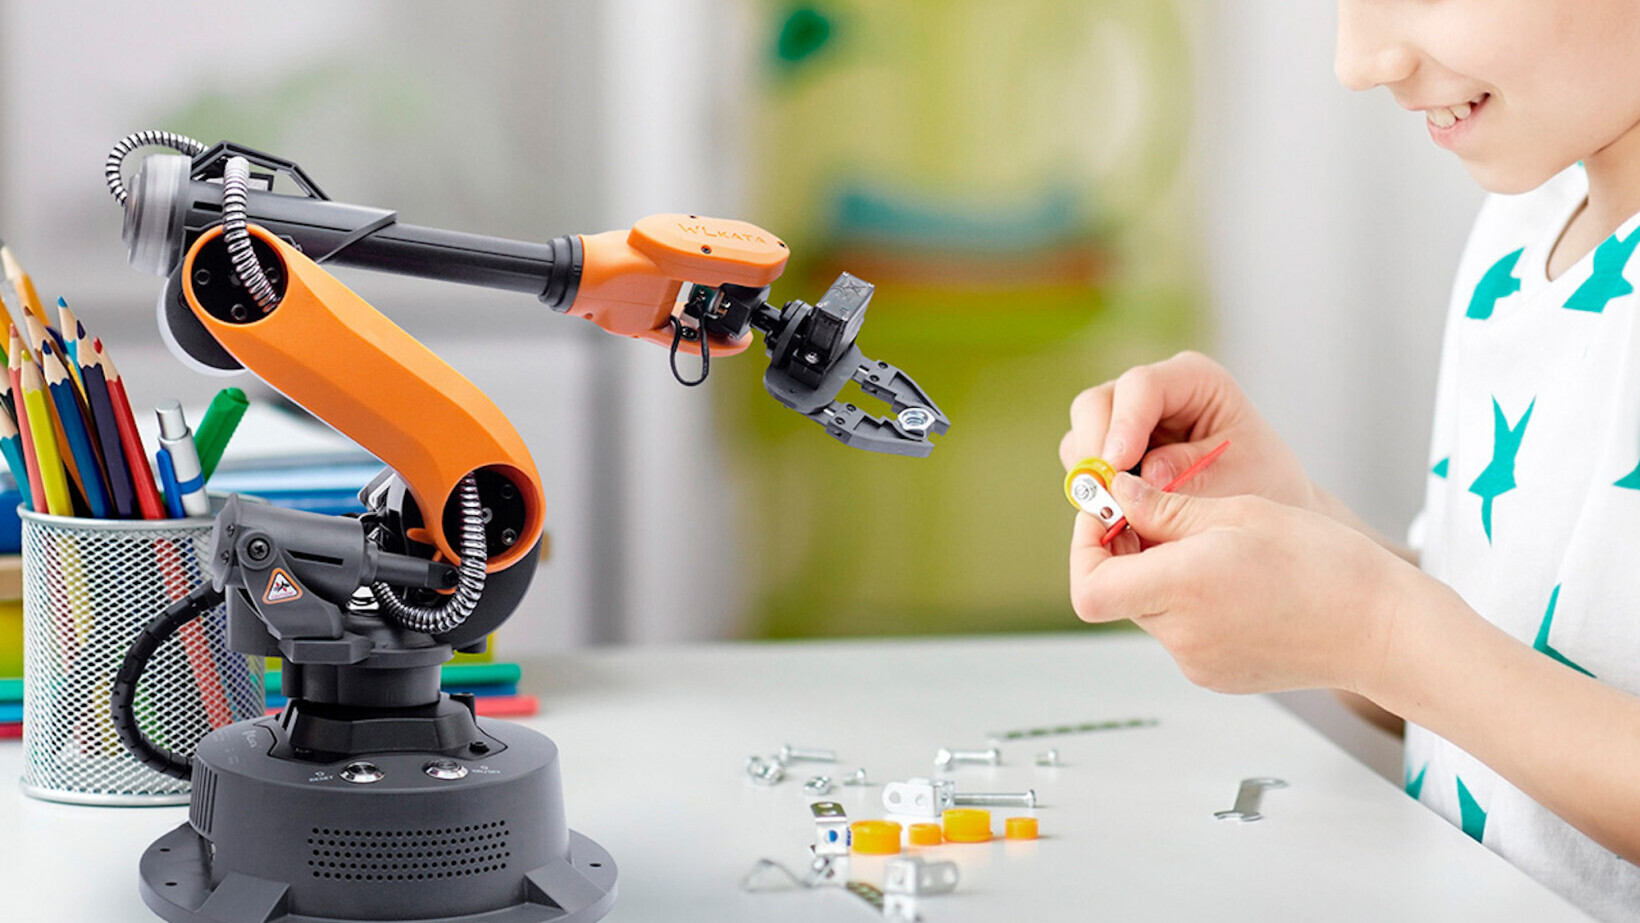 Support scientific interest with a price drop on this comprehensive robot arm kit